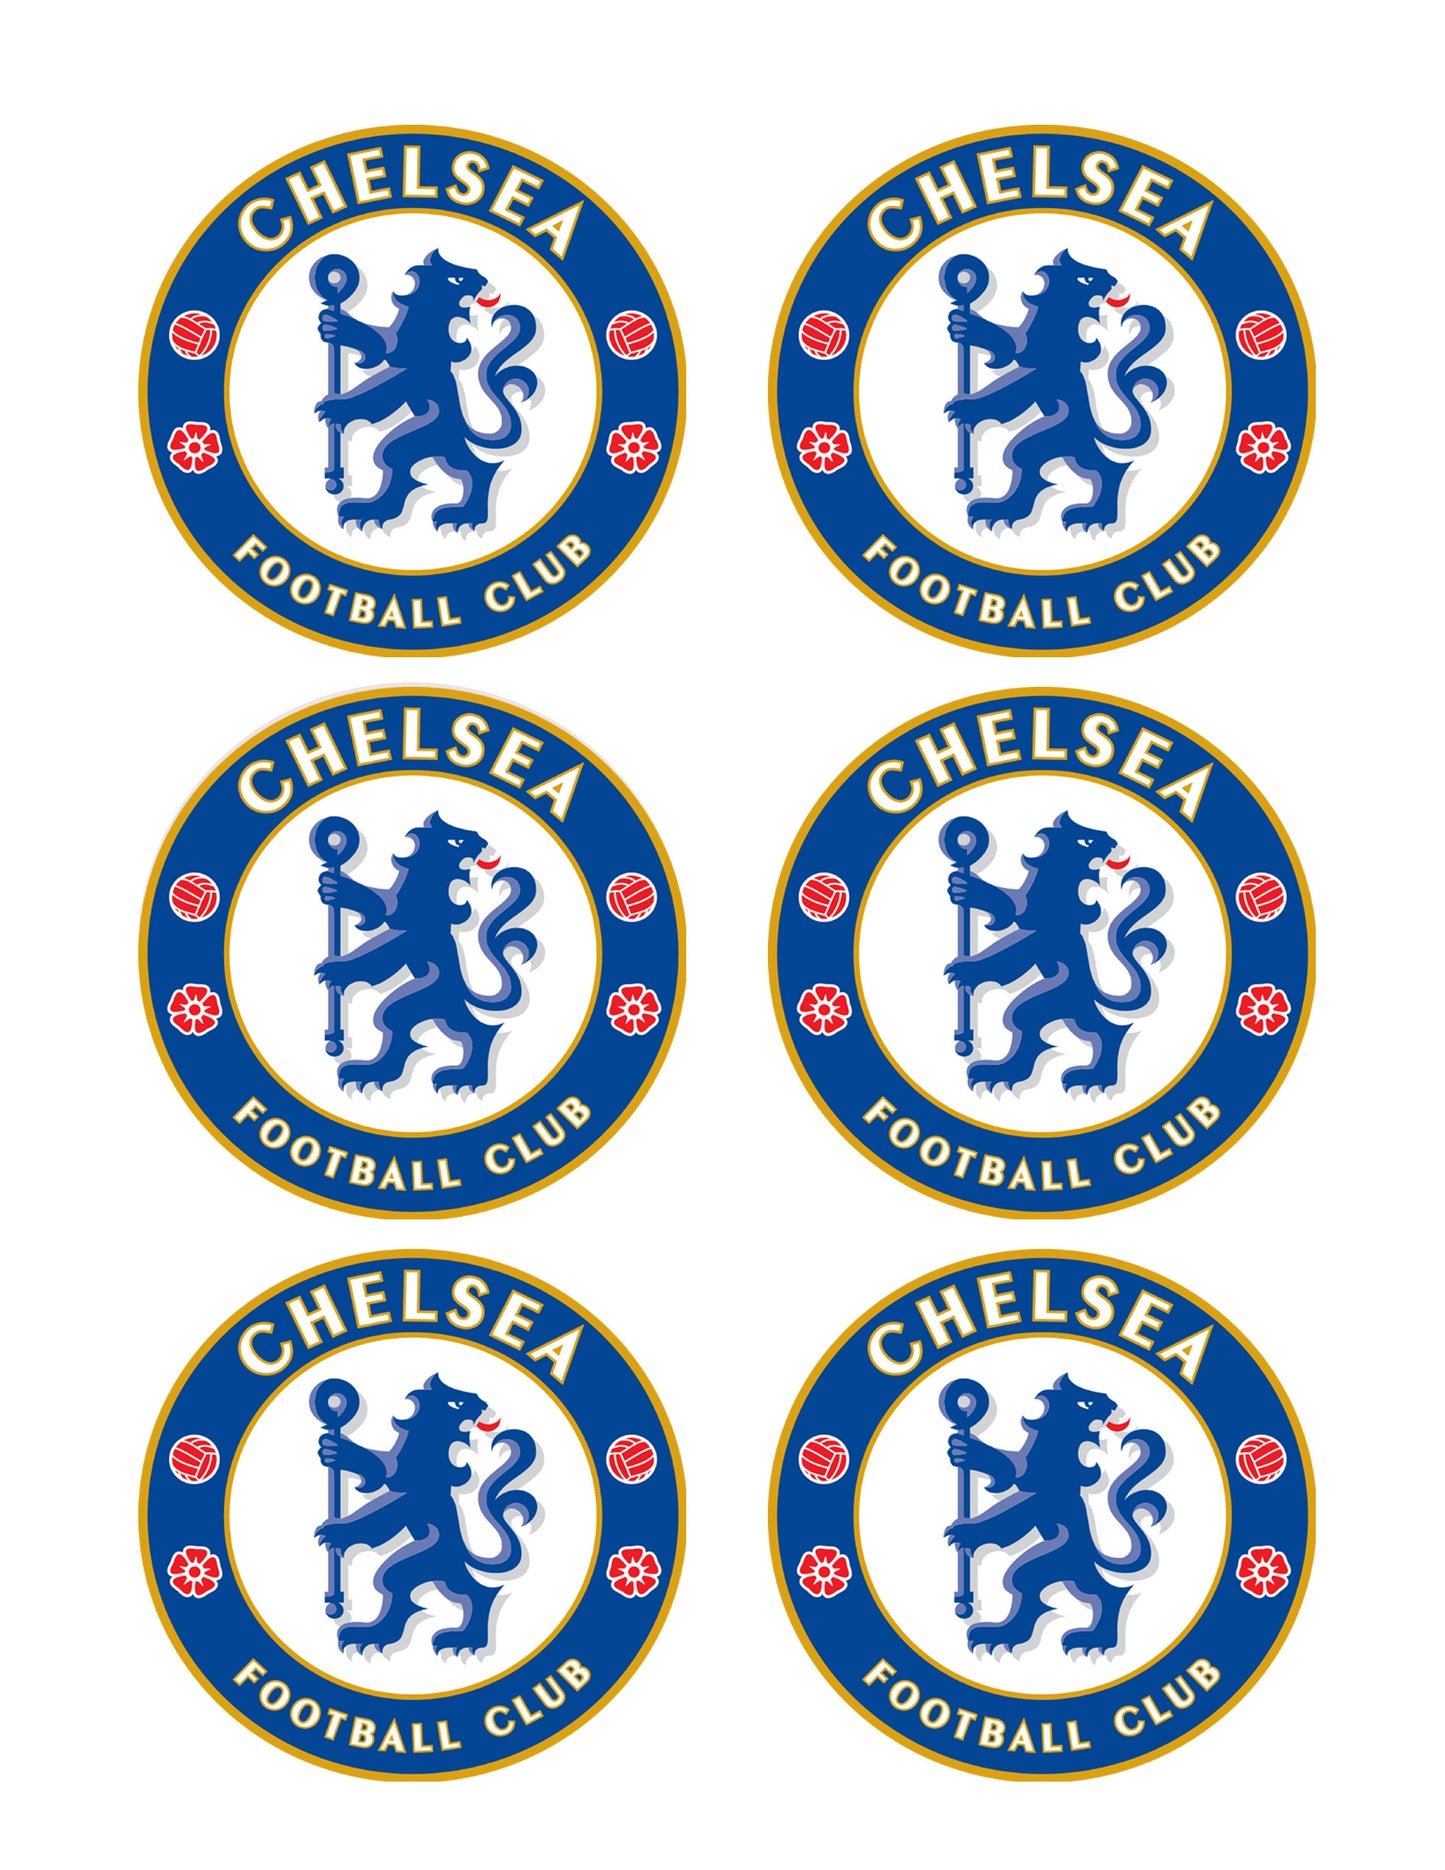 Chelsea Football Club - Edible Cake Topper, Cupcake Toppers, Strips